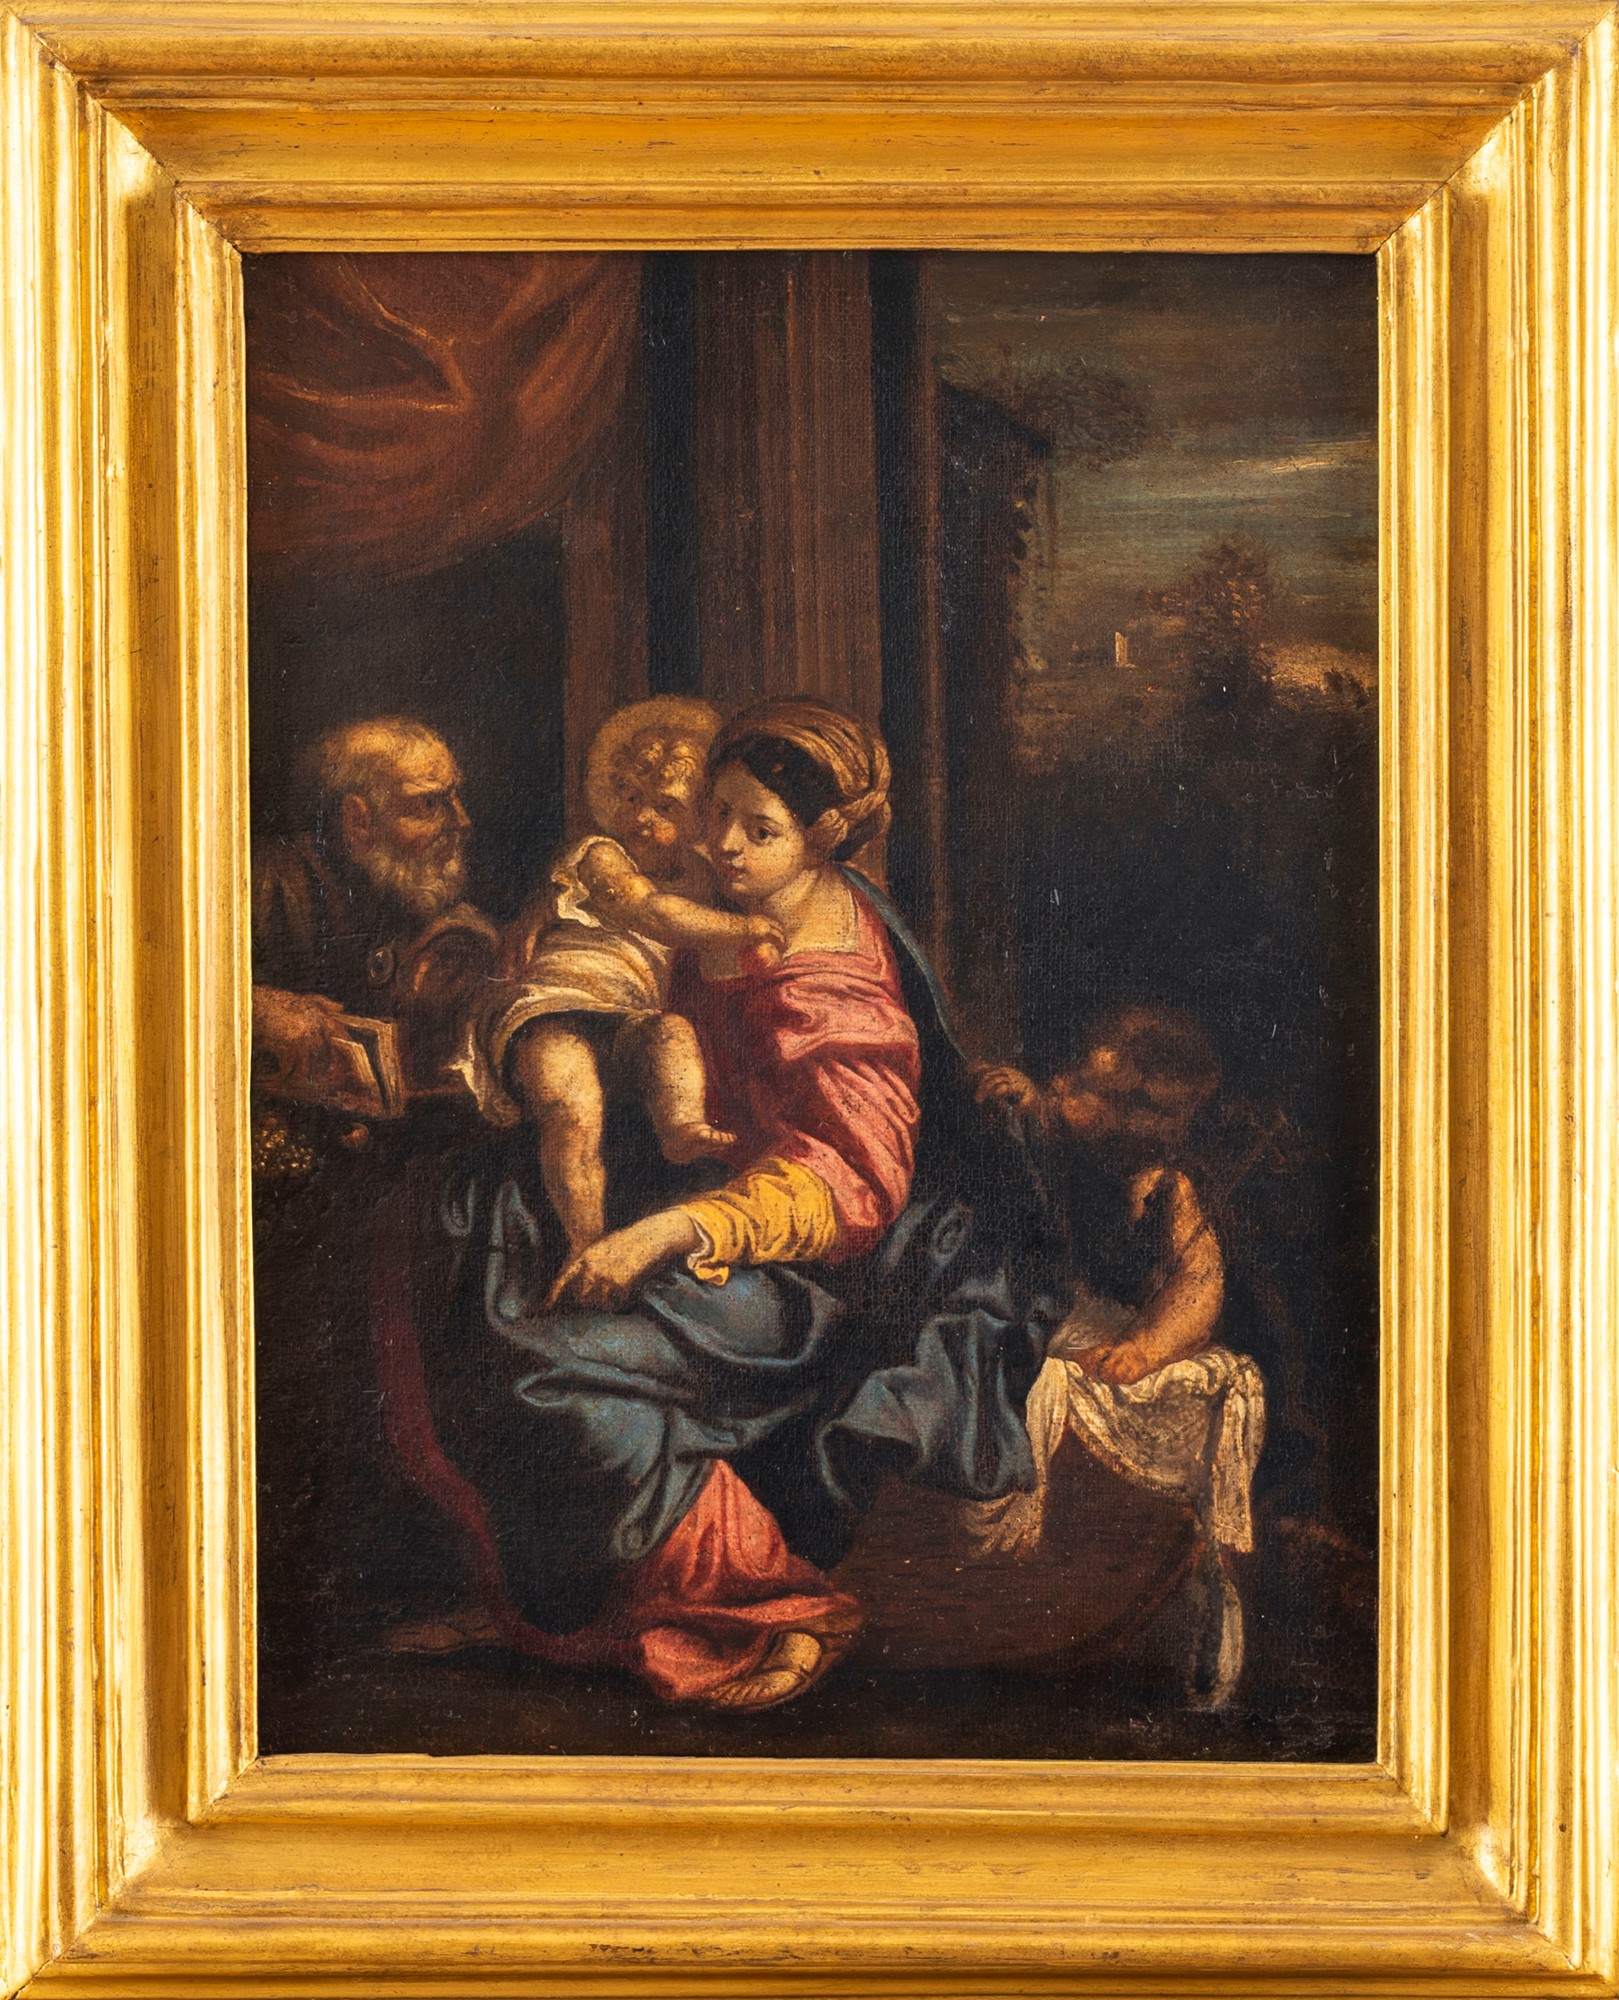 After Annibale Carracci - Holy Family with St. John (Madonna Montalto) - Image 2 of 3